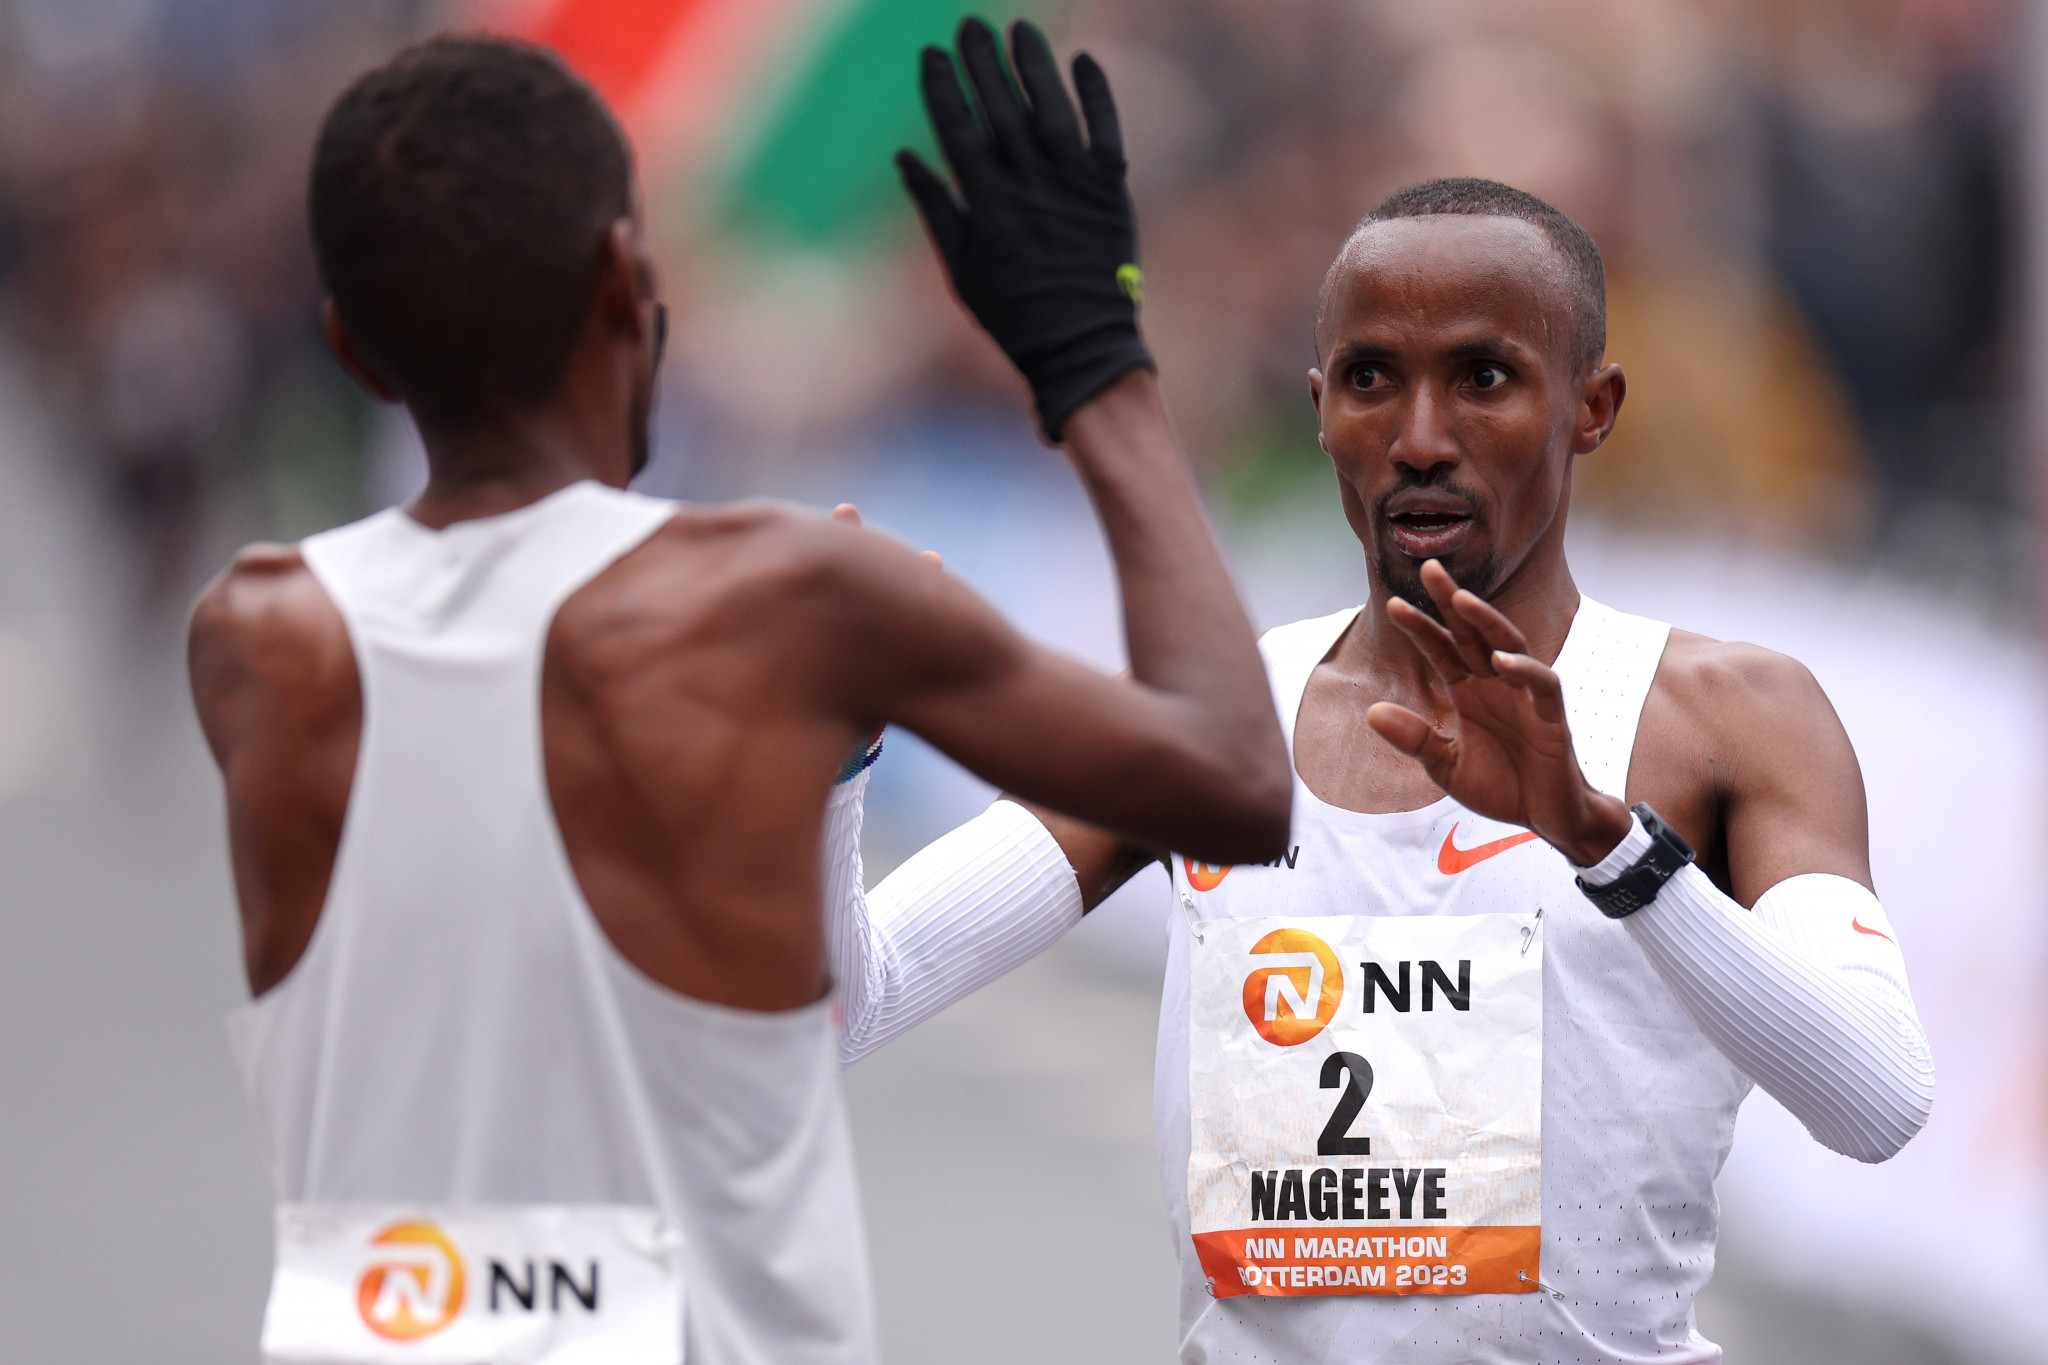 Dutch marathon runner Abdi Nageeye wears a diabetic monitor on his left arm to manage his glucose levels. GETTY IMAGES